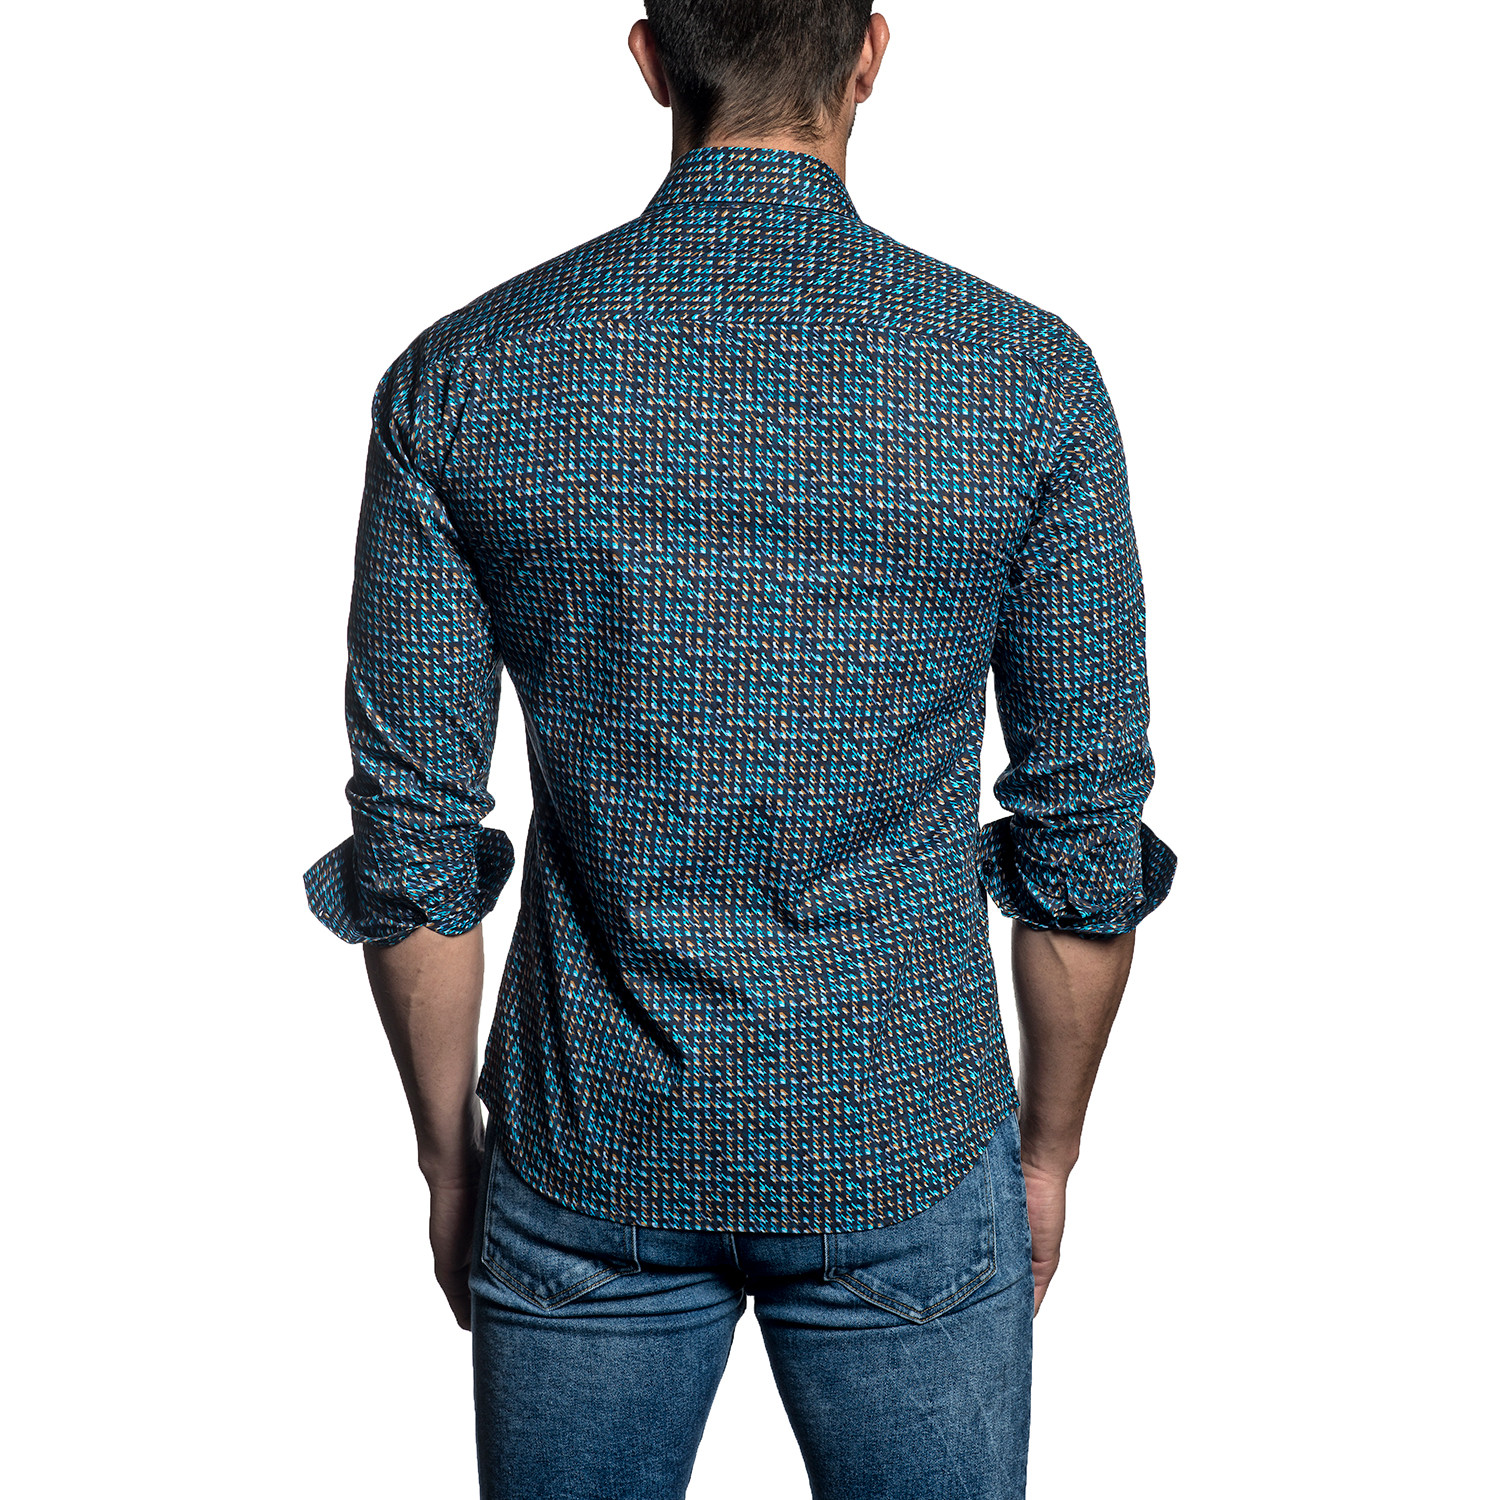 Woven Button-Up // Navy Multi Pattern (2XL) - Jared Lang - Touch of Modern